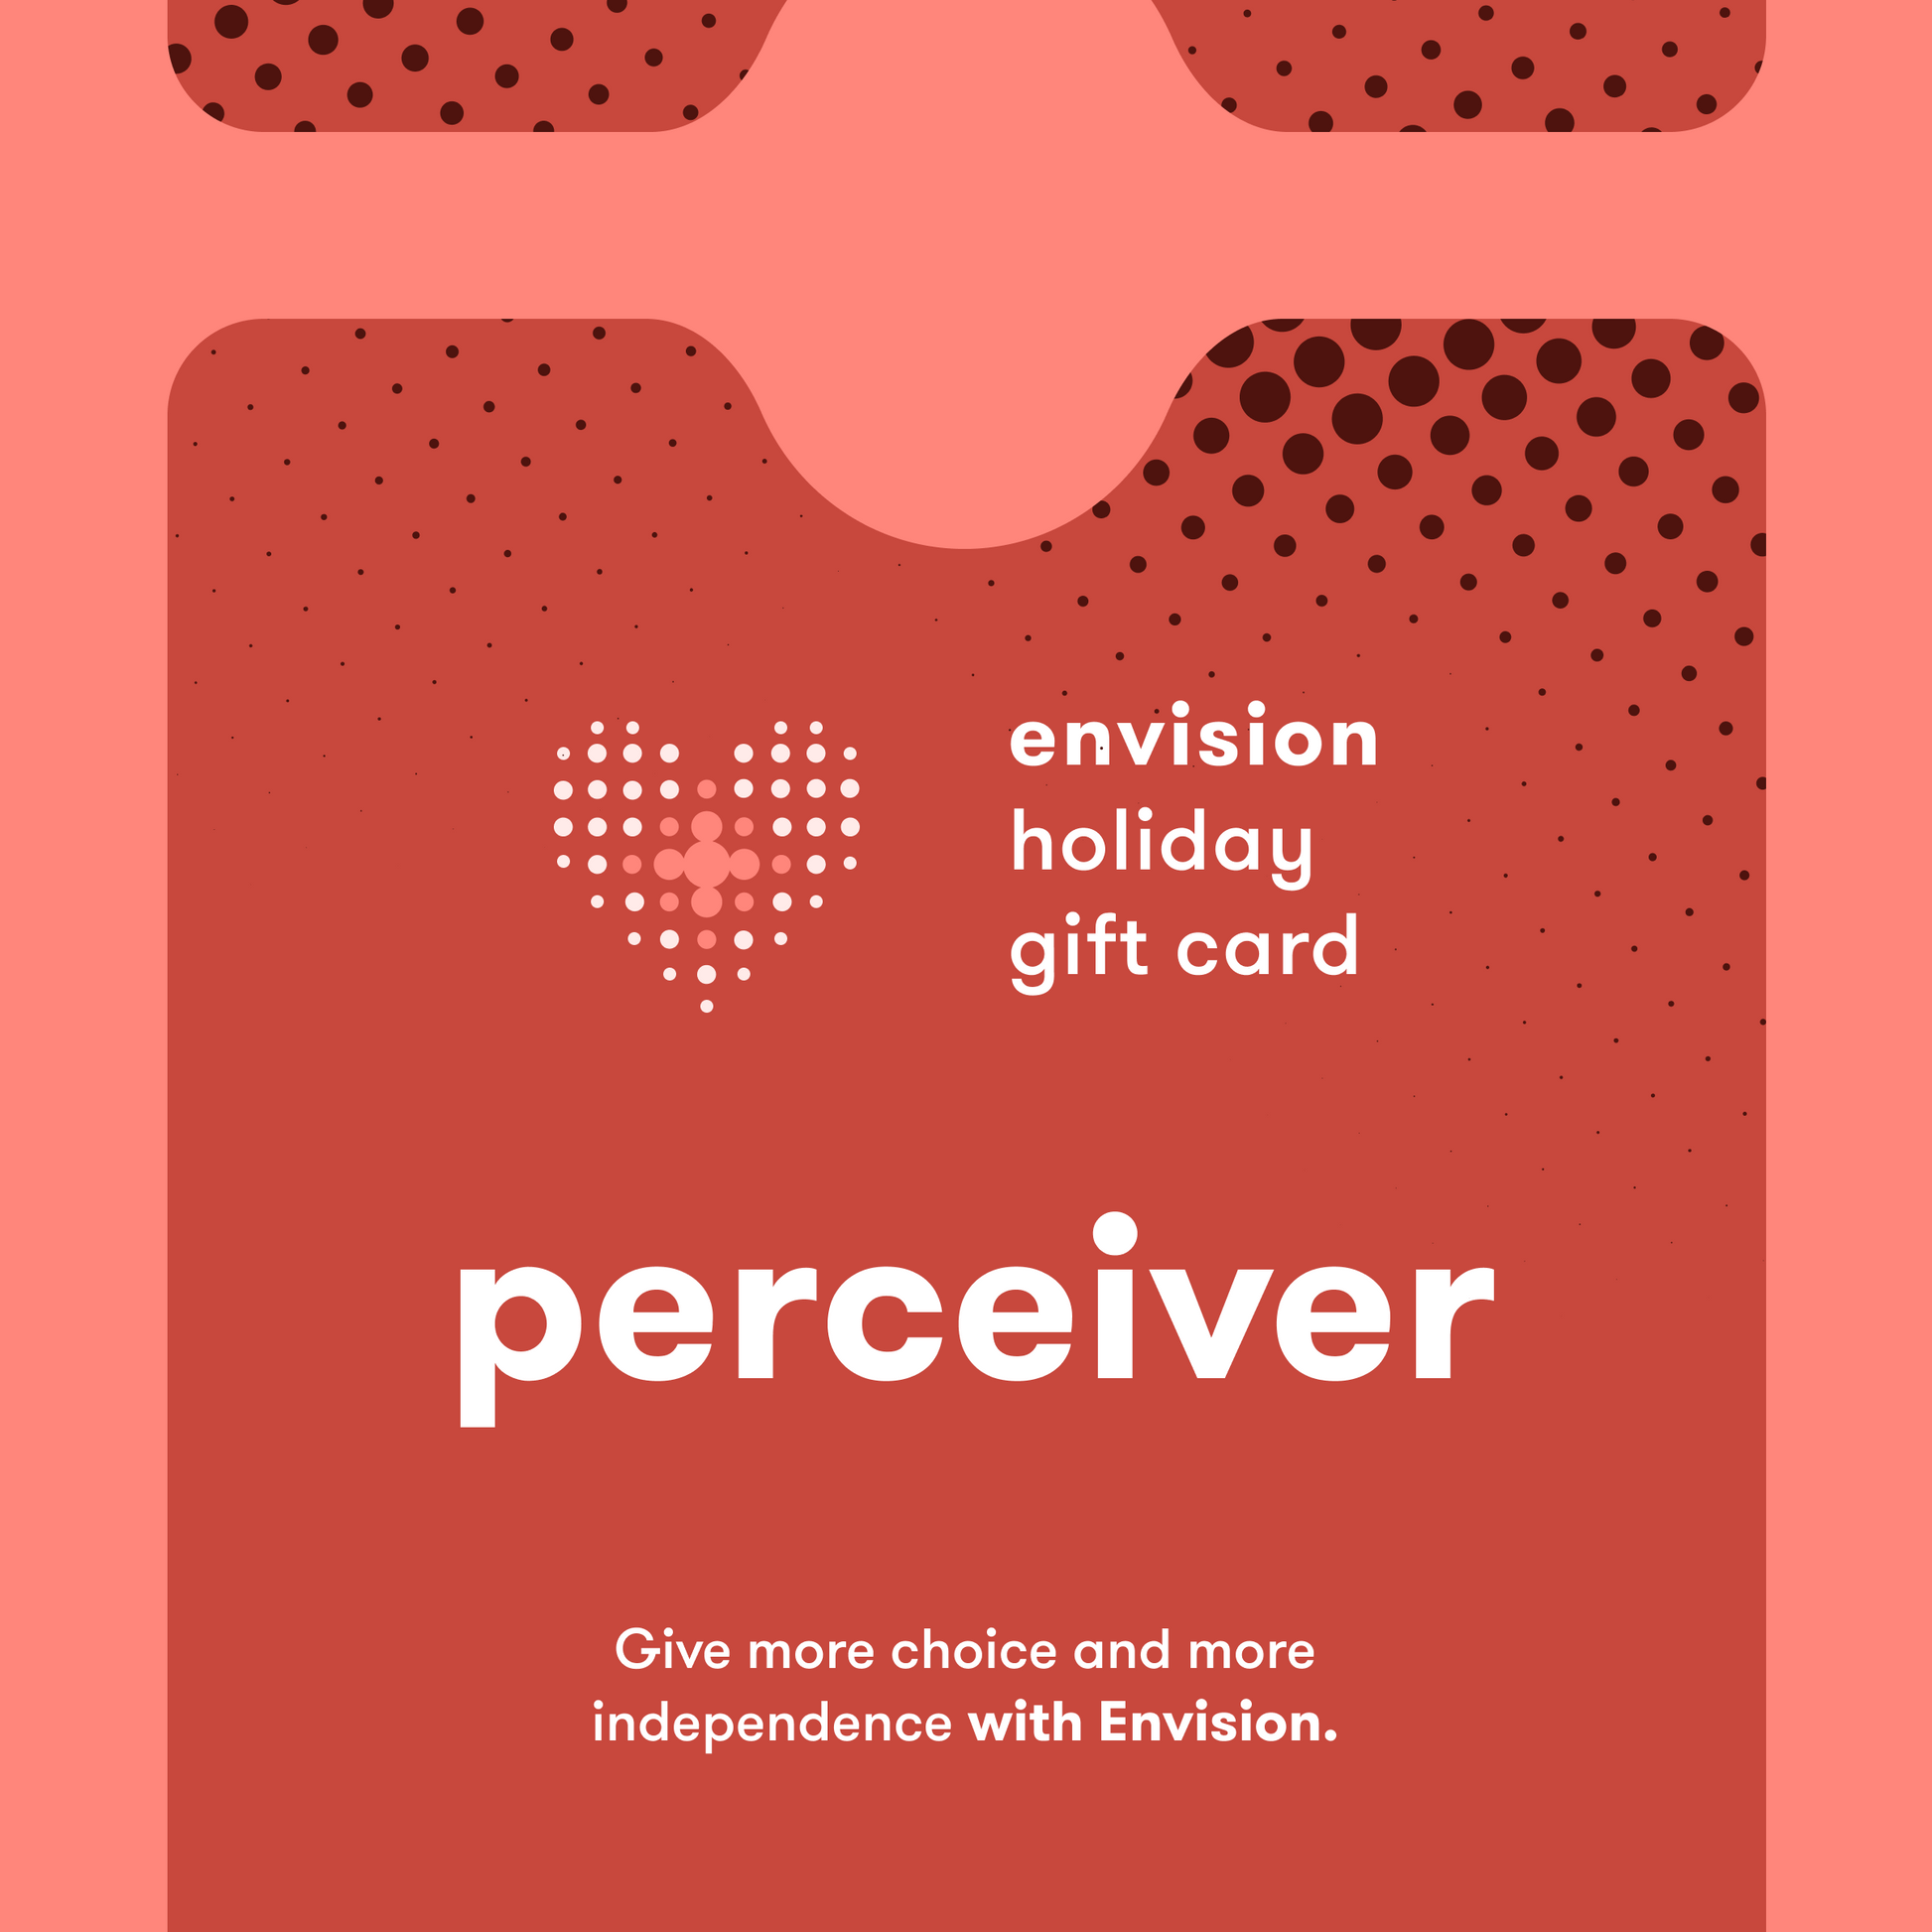 Illustration of a giftcard with the text stating: envision holiday gift card, perceiver, give more choise and more independence with Envision.